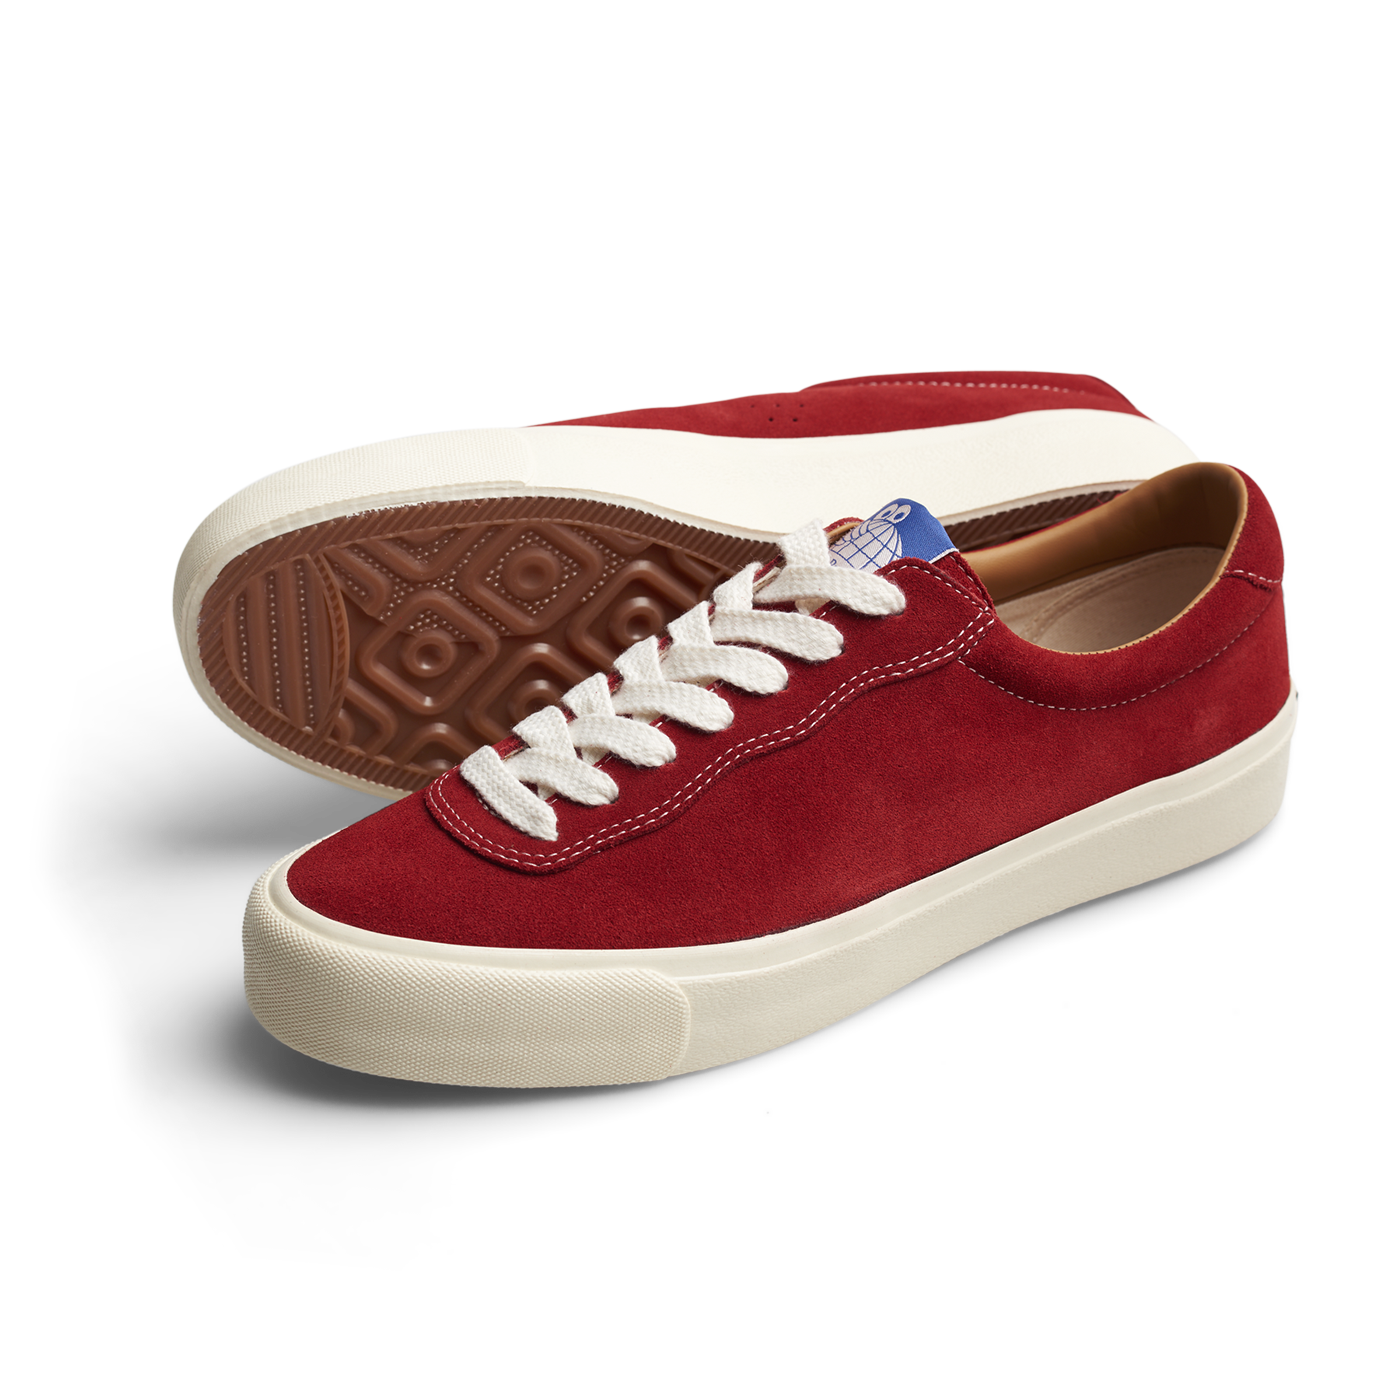 VM001-Suede LO (Old Red/White)